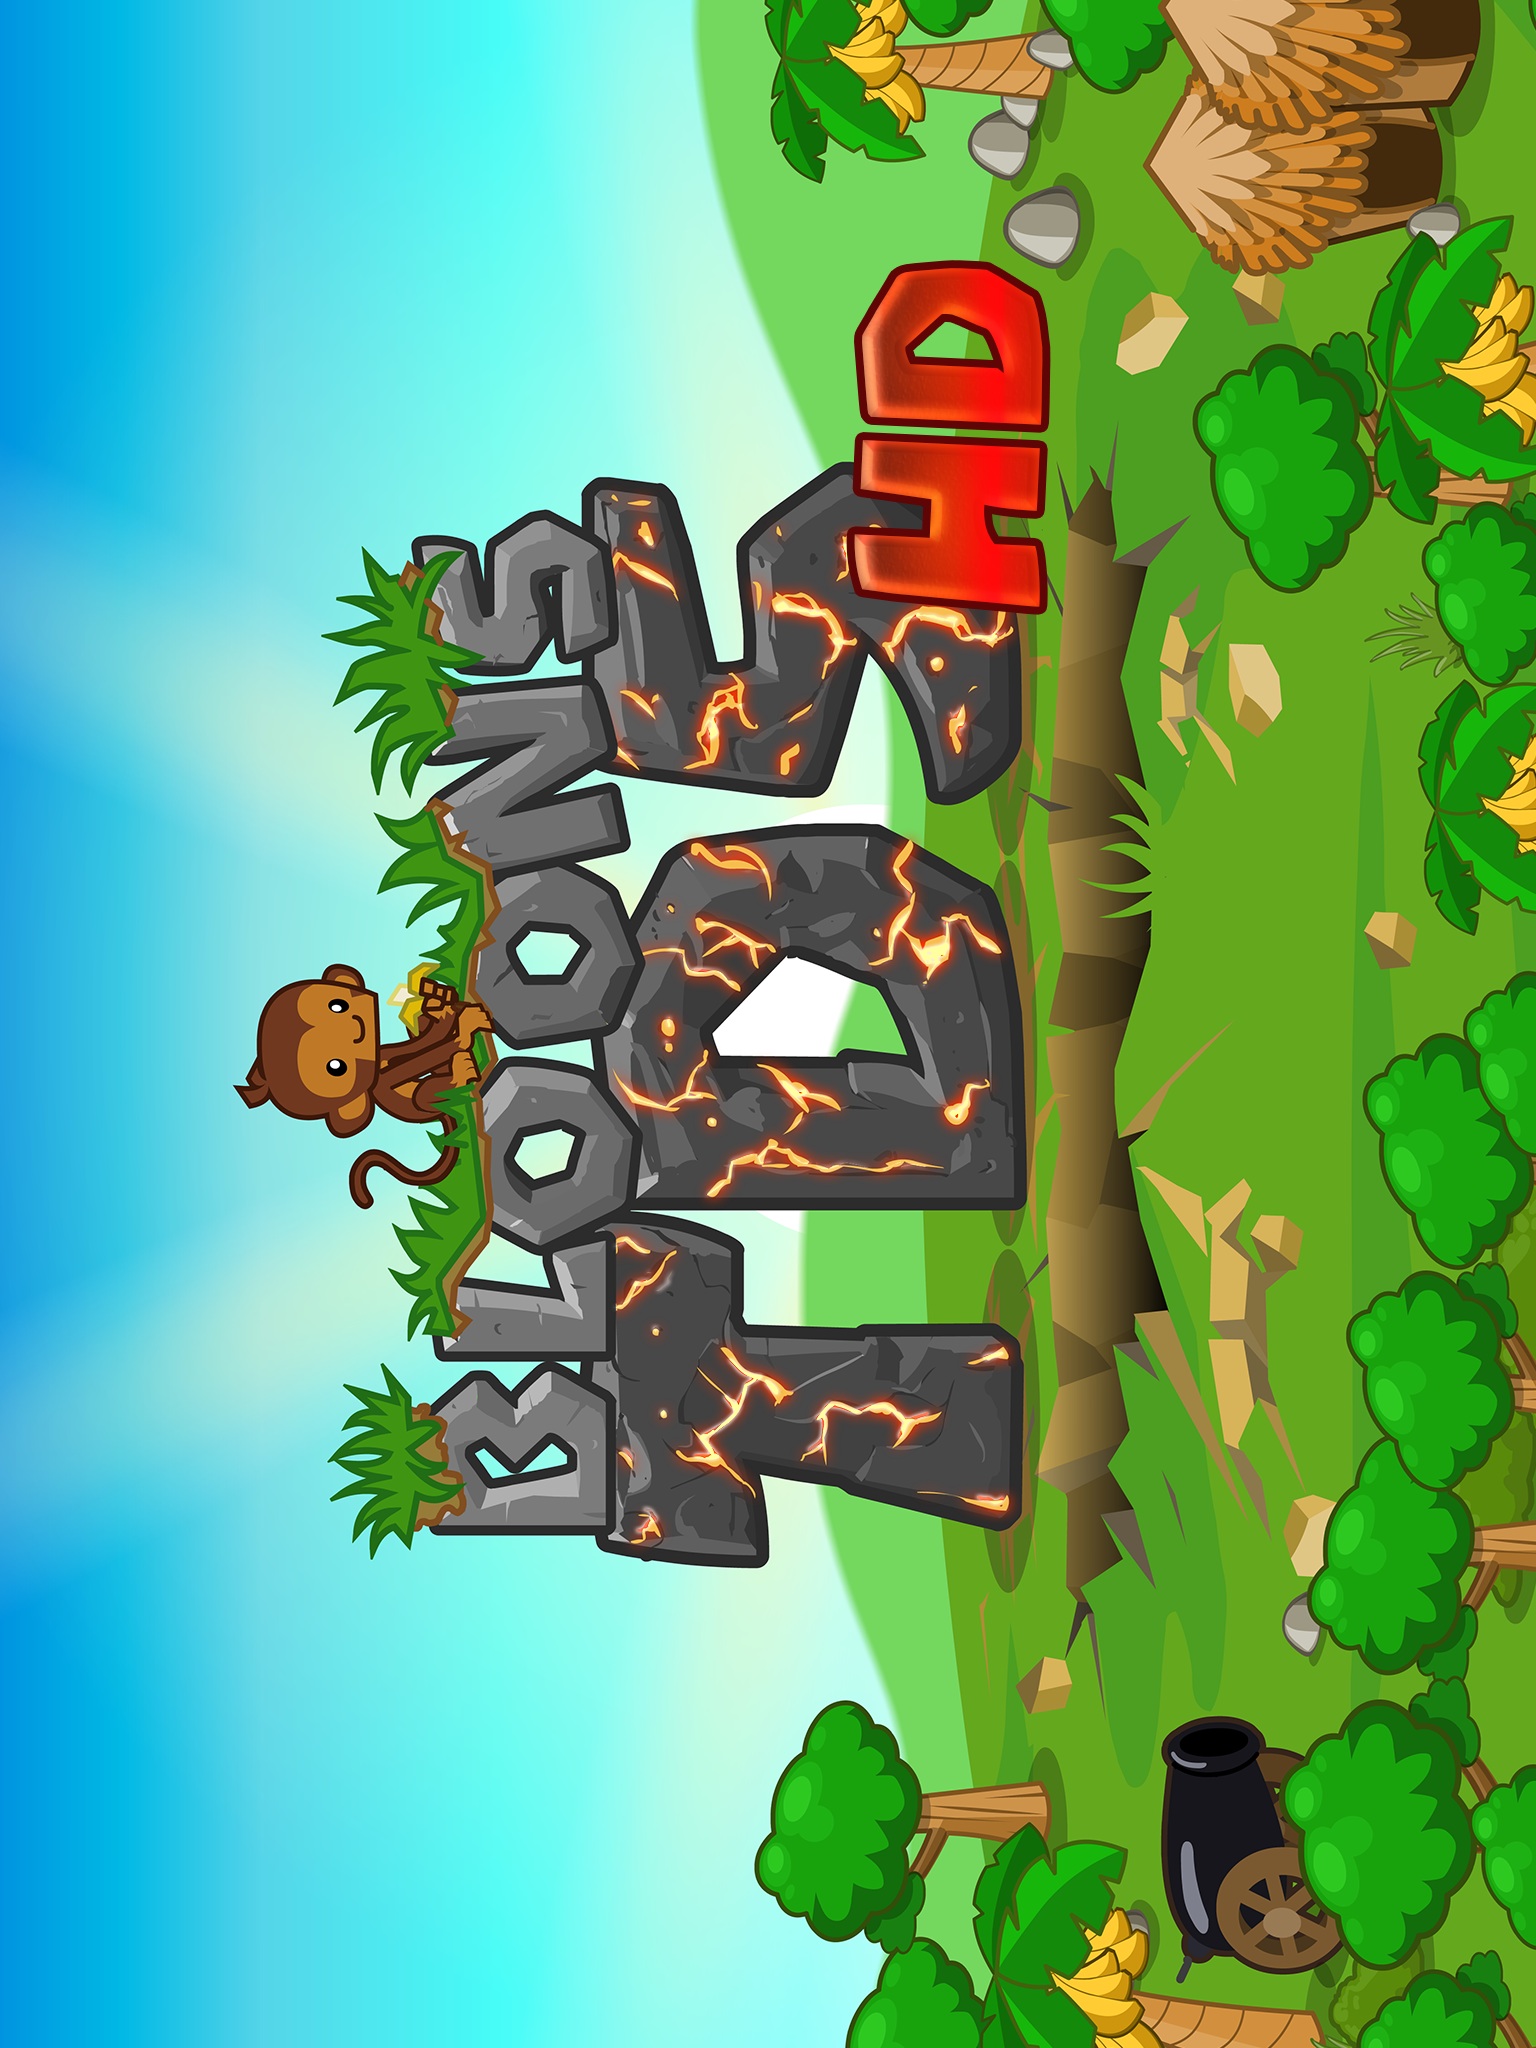 bloons td 5 hacked ios download